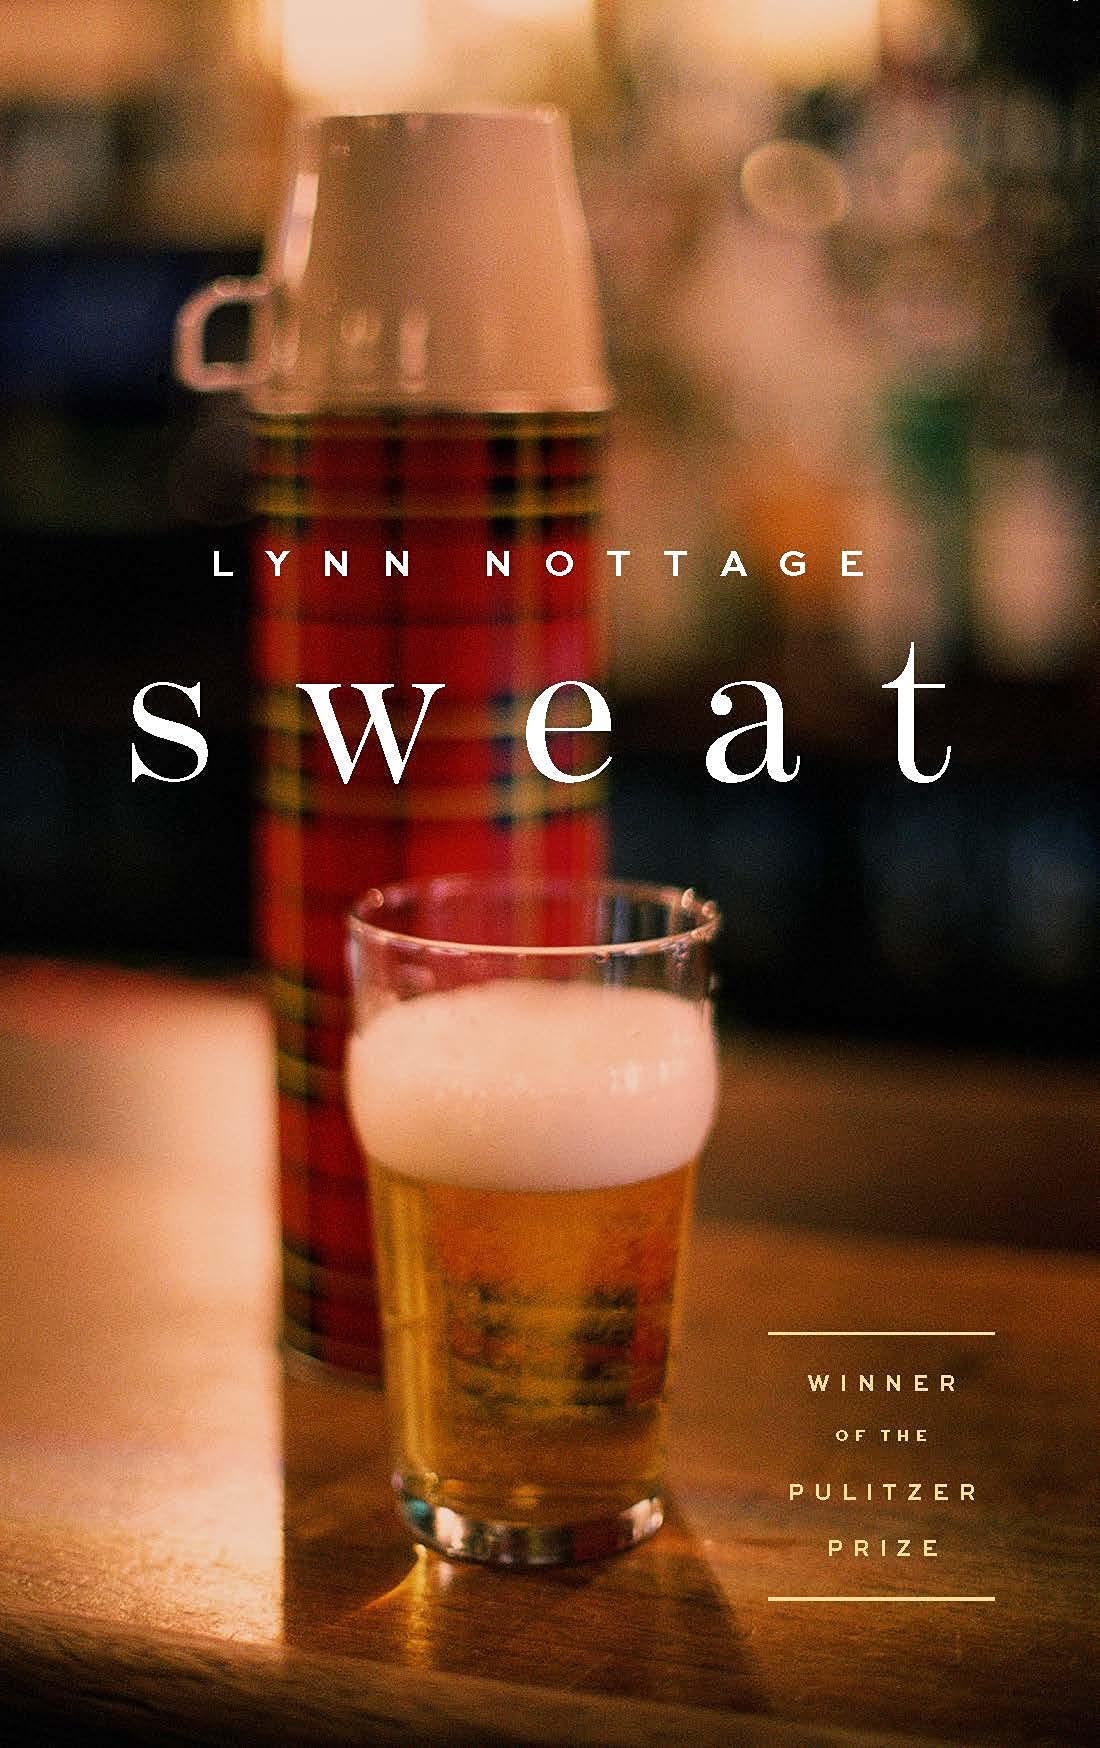 Book Cover for Sweat by Lynn Nottage